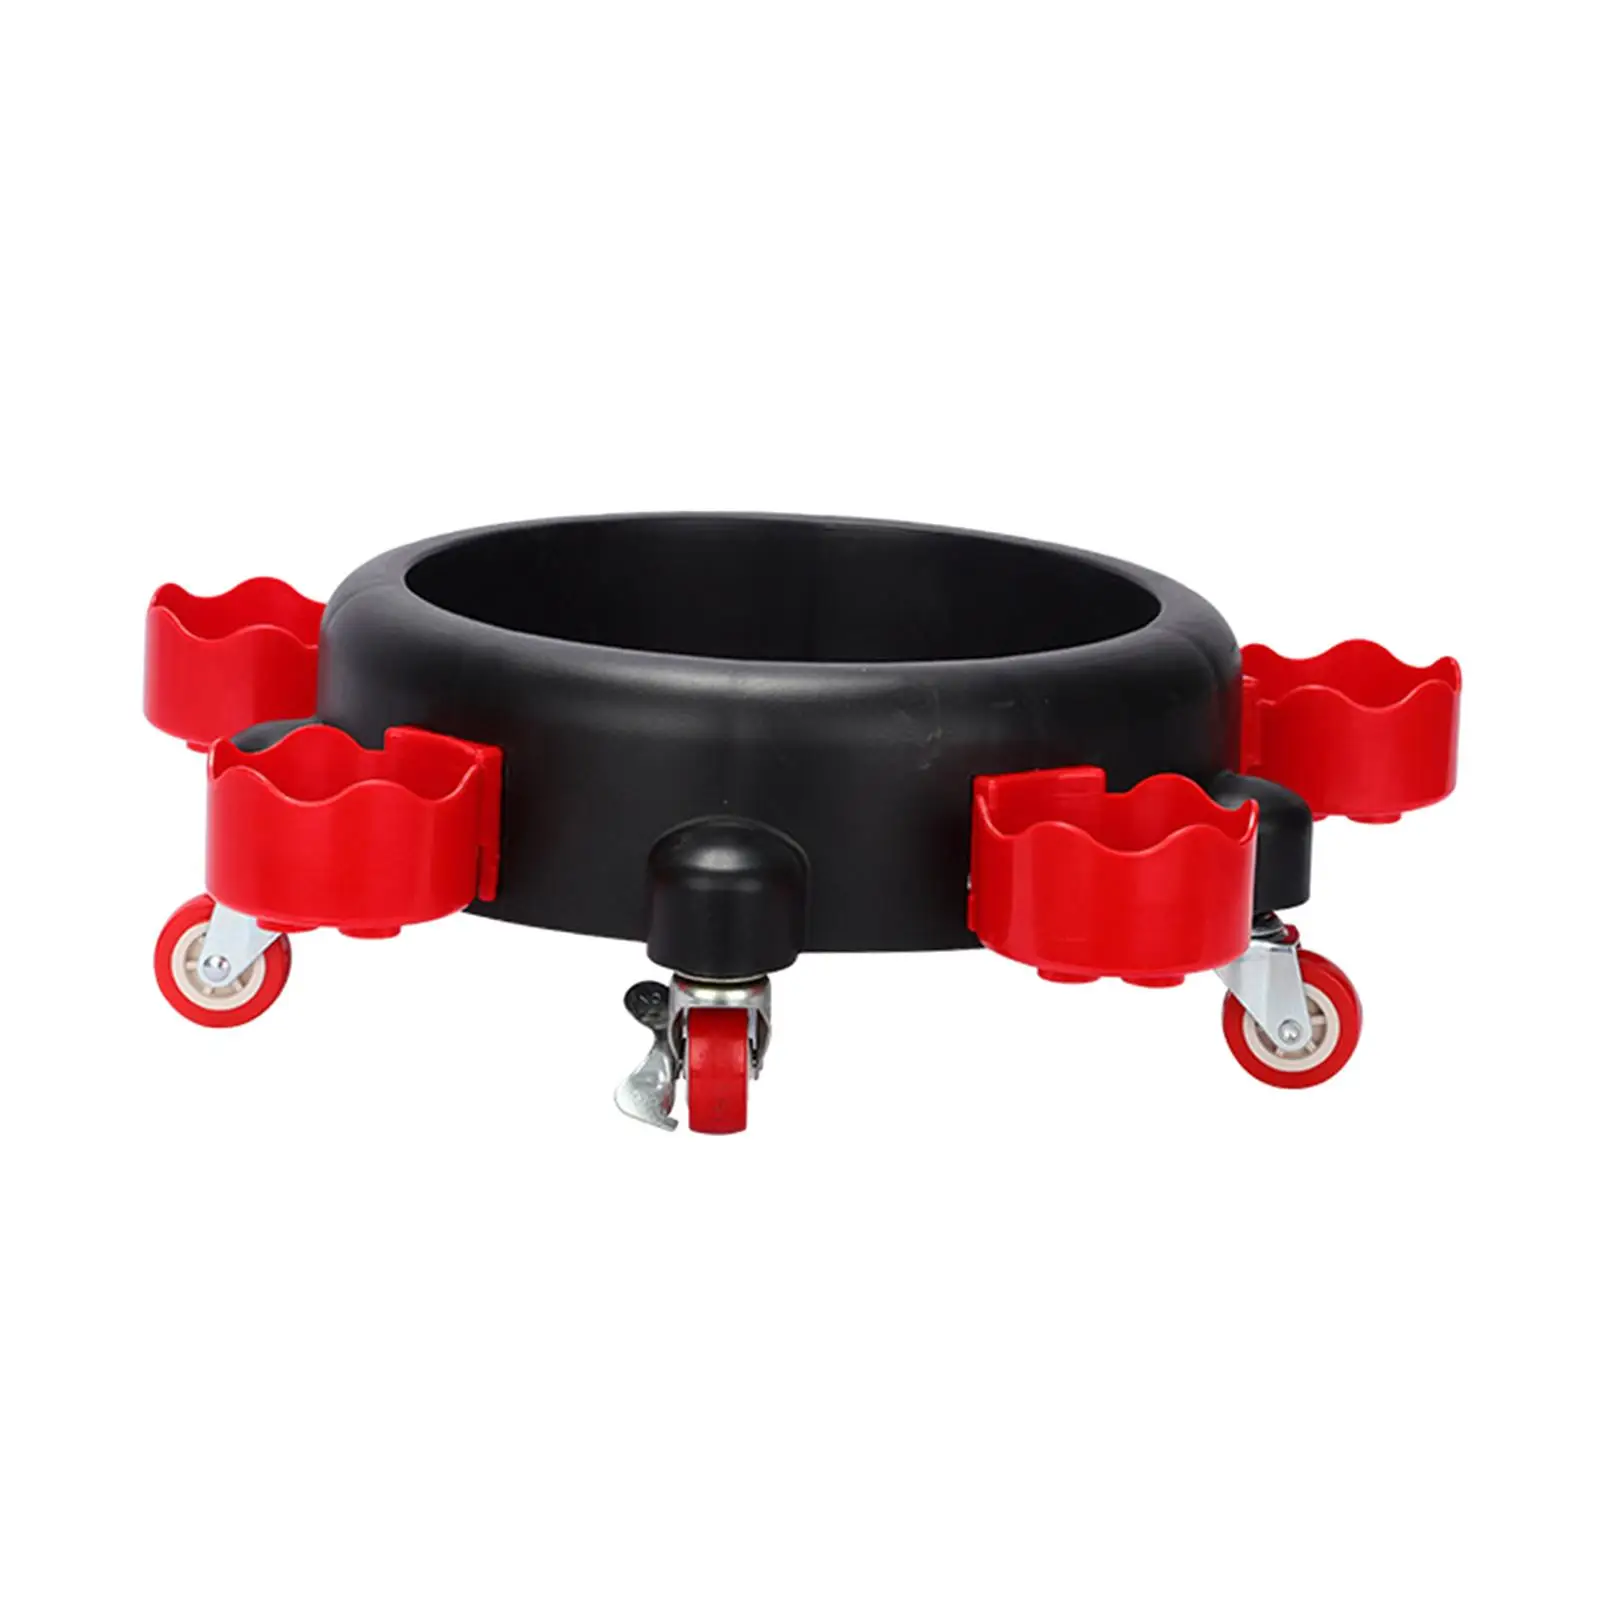 Rolling Bucket Dolly Heavy Duty Accessories Car Wash Bucket Insert for Wash Detailing Caddy Car Washing Building Workers